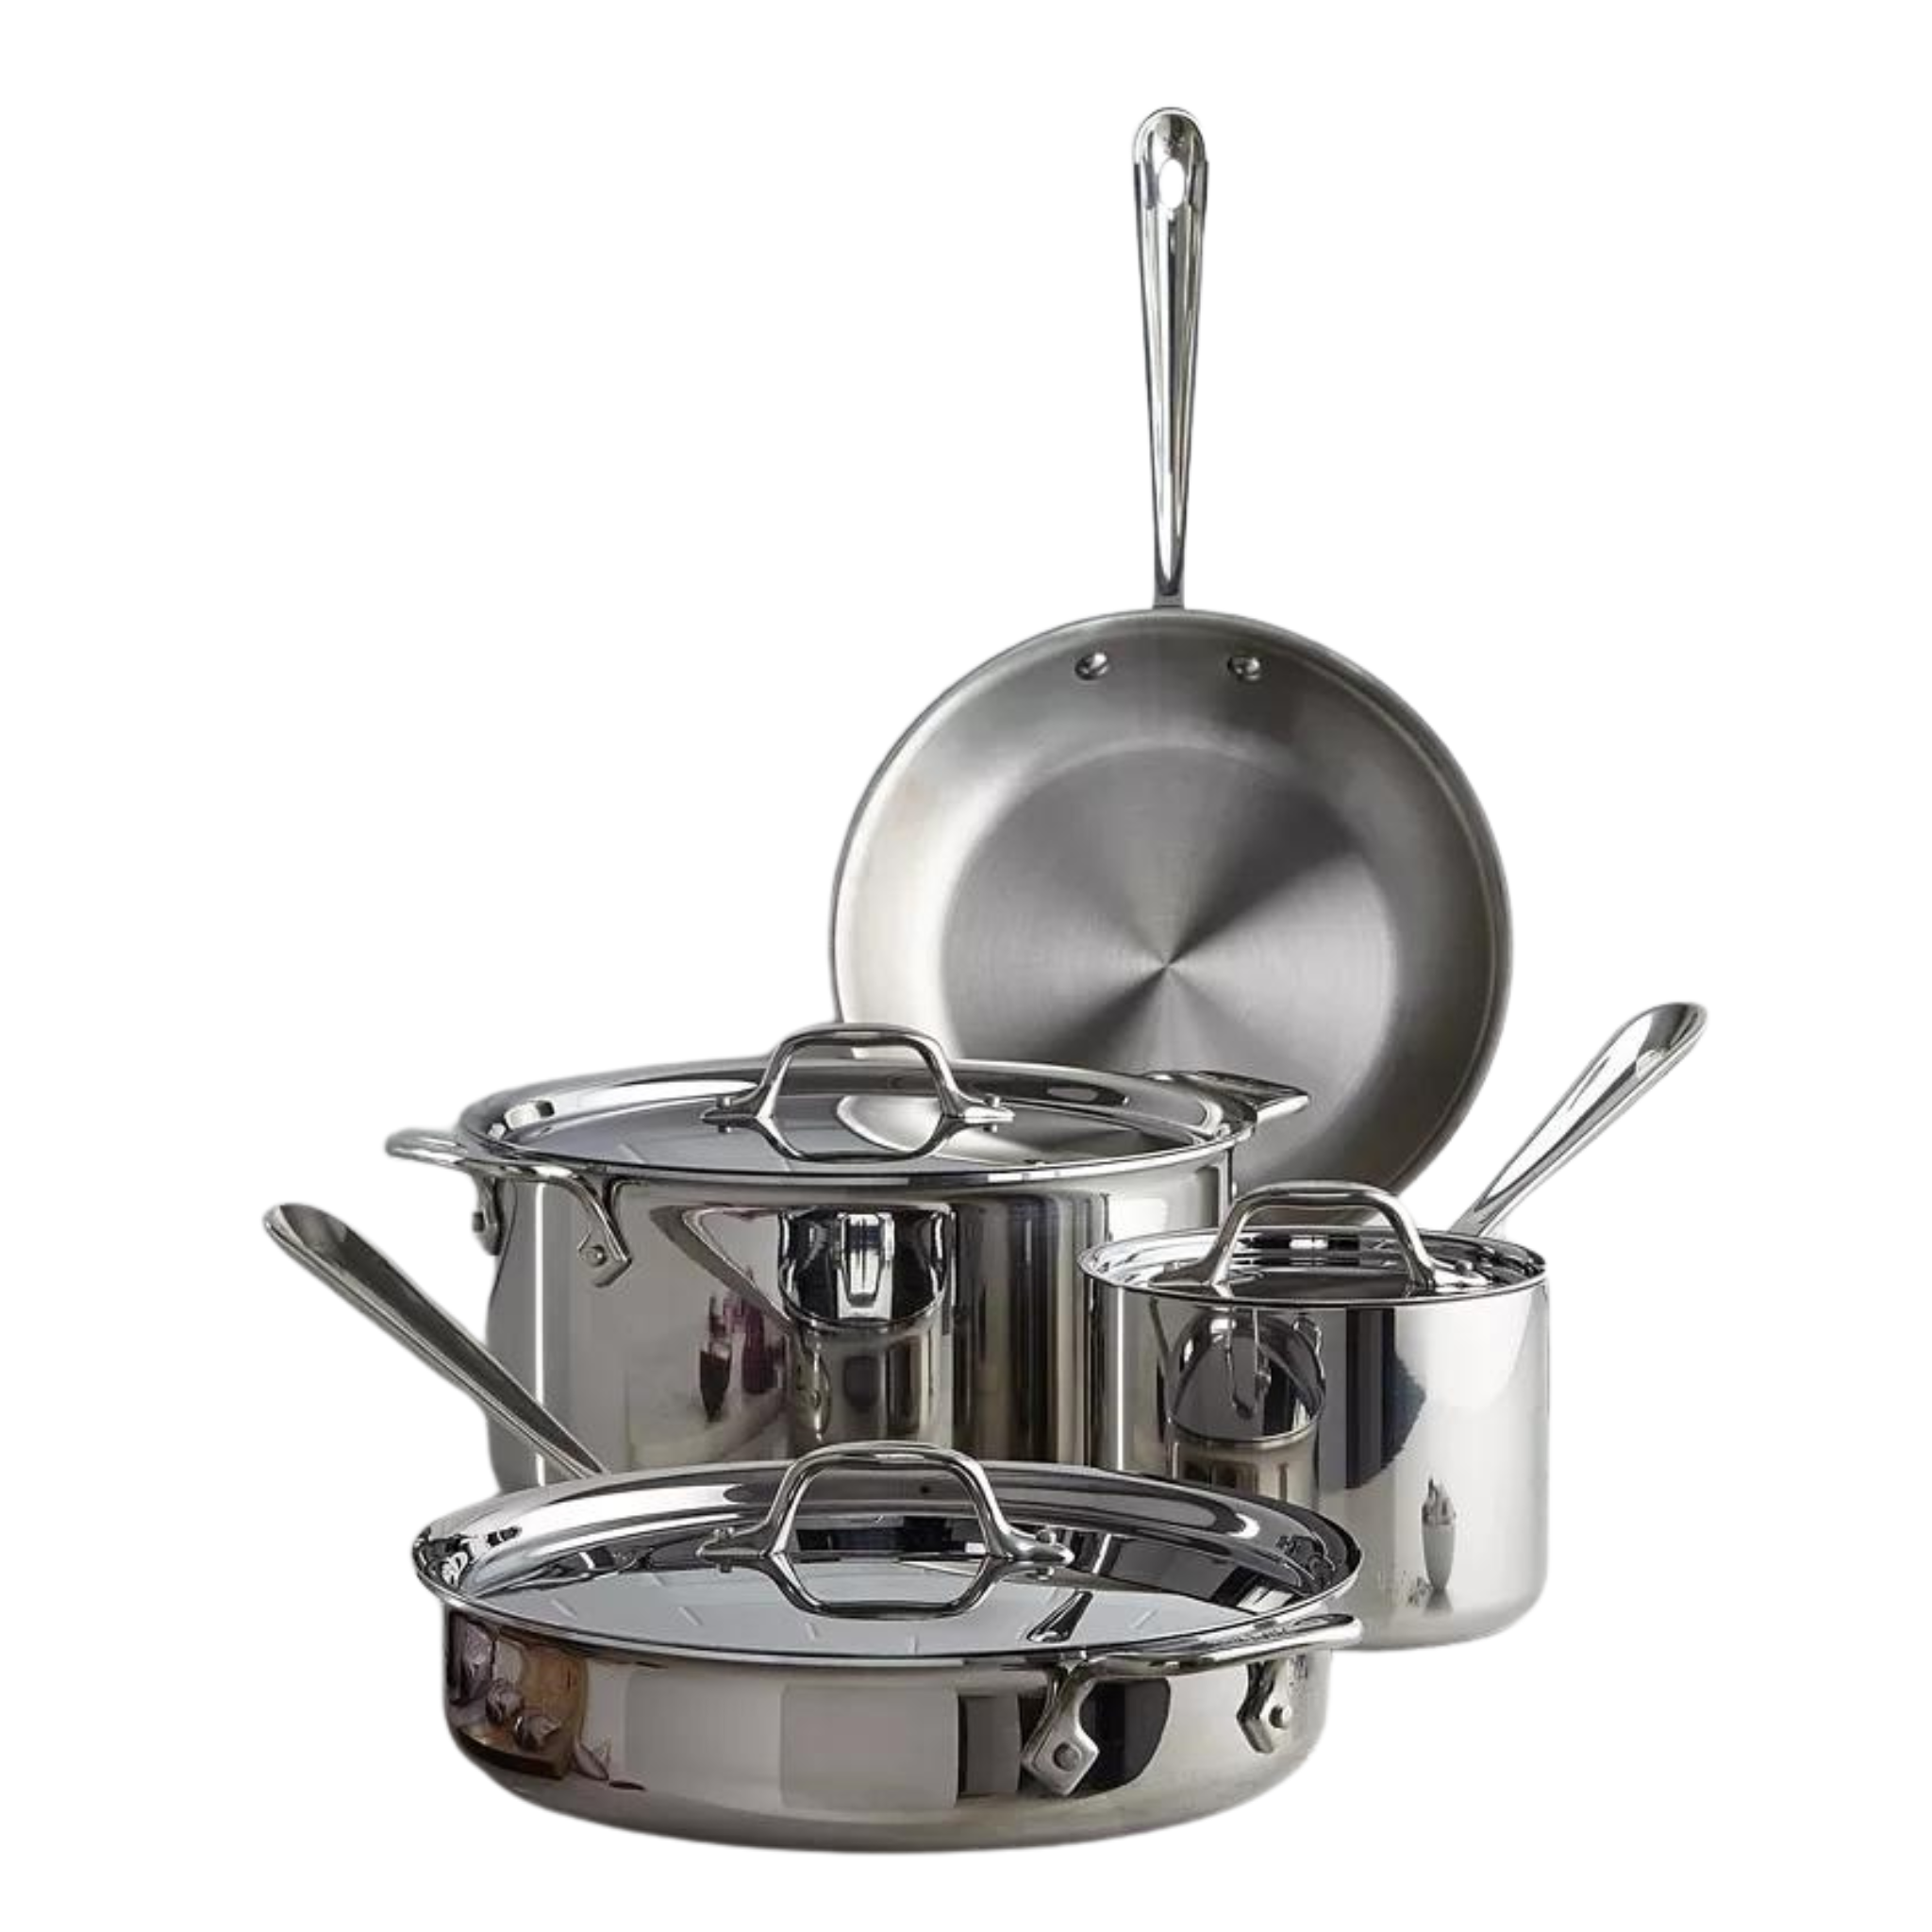 All-Clad D3 3-Ply Stainless Steel 7 Piece Cookware Se